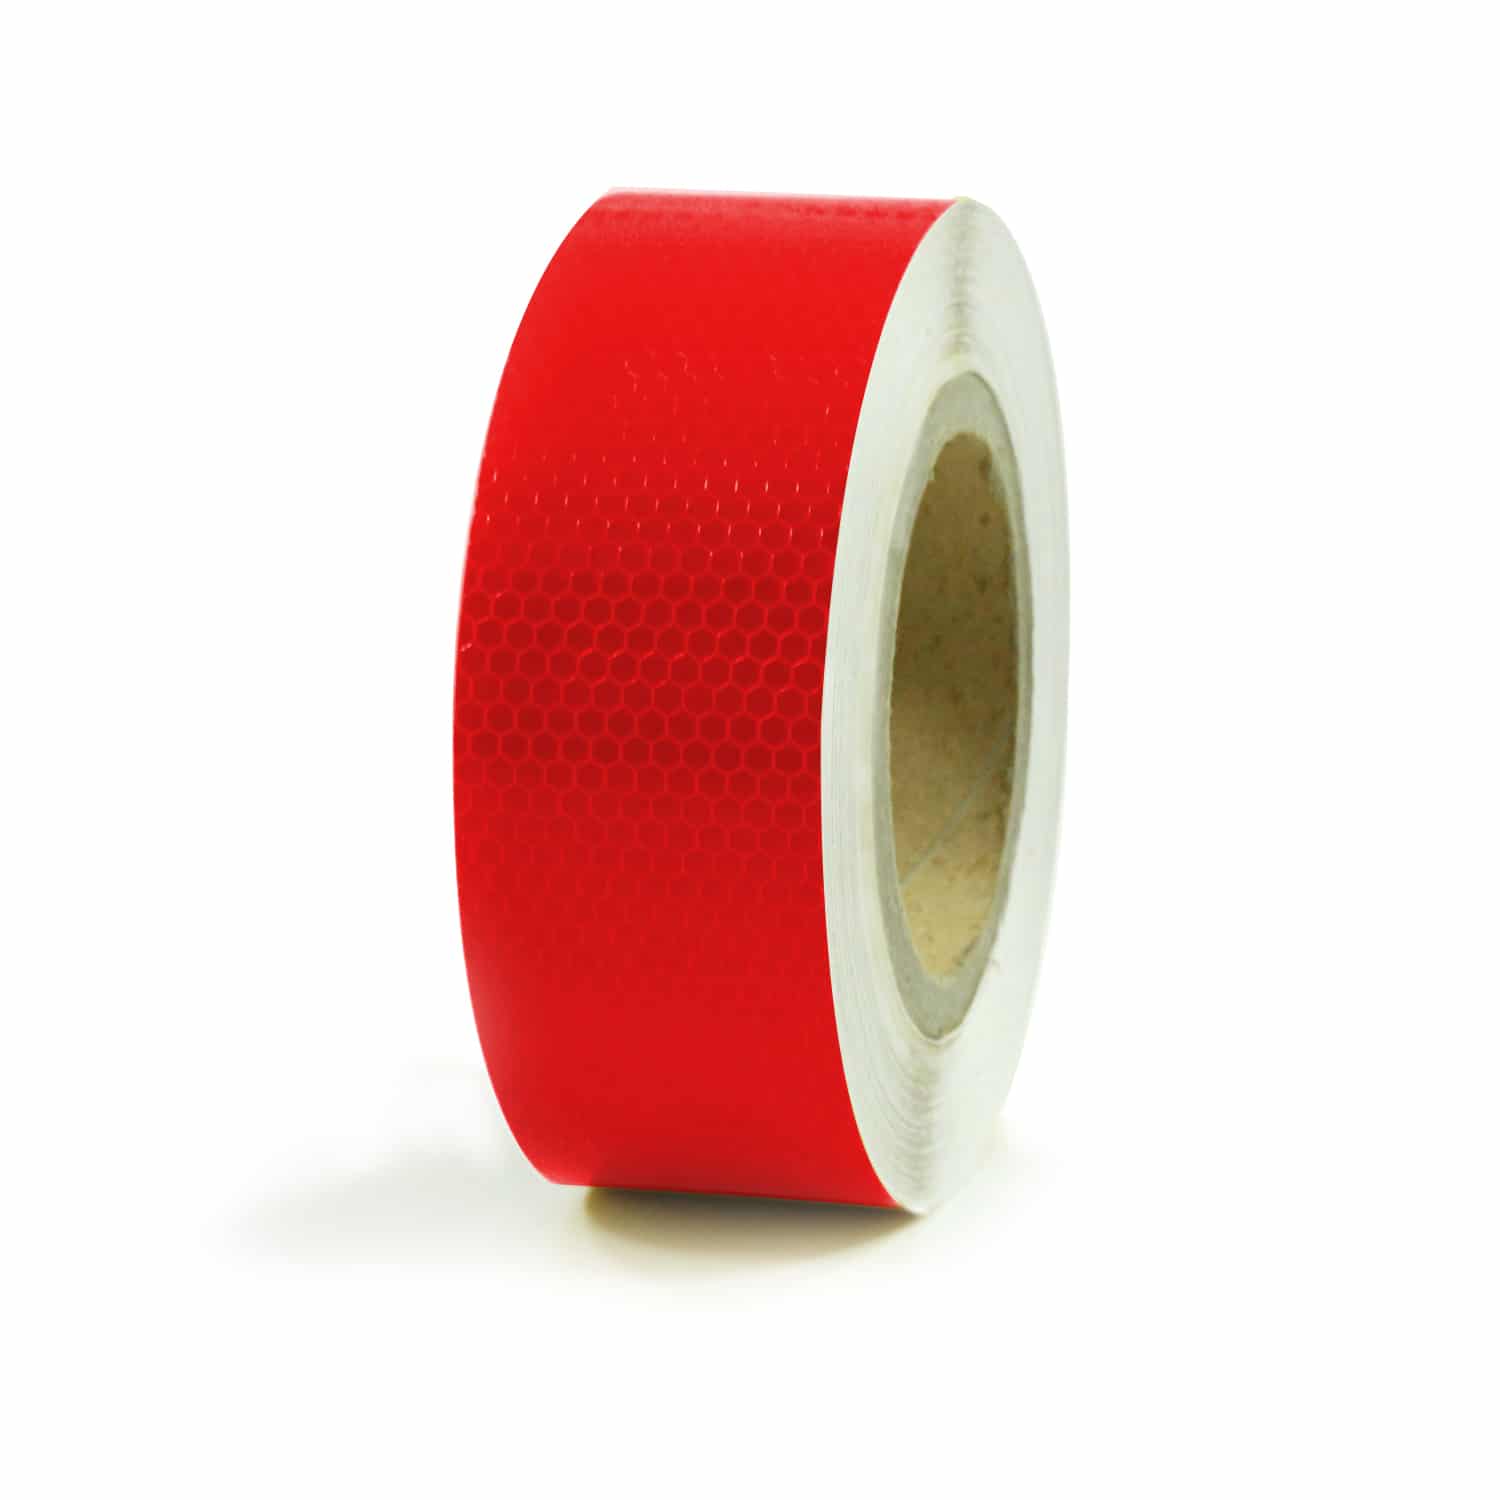 Abrams 2" in x 150' ft Diamond Pattern Trailer Truck Conspicuity DOT Class 2 Reflective Safety Tape